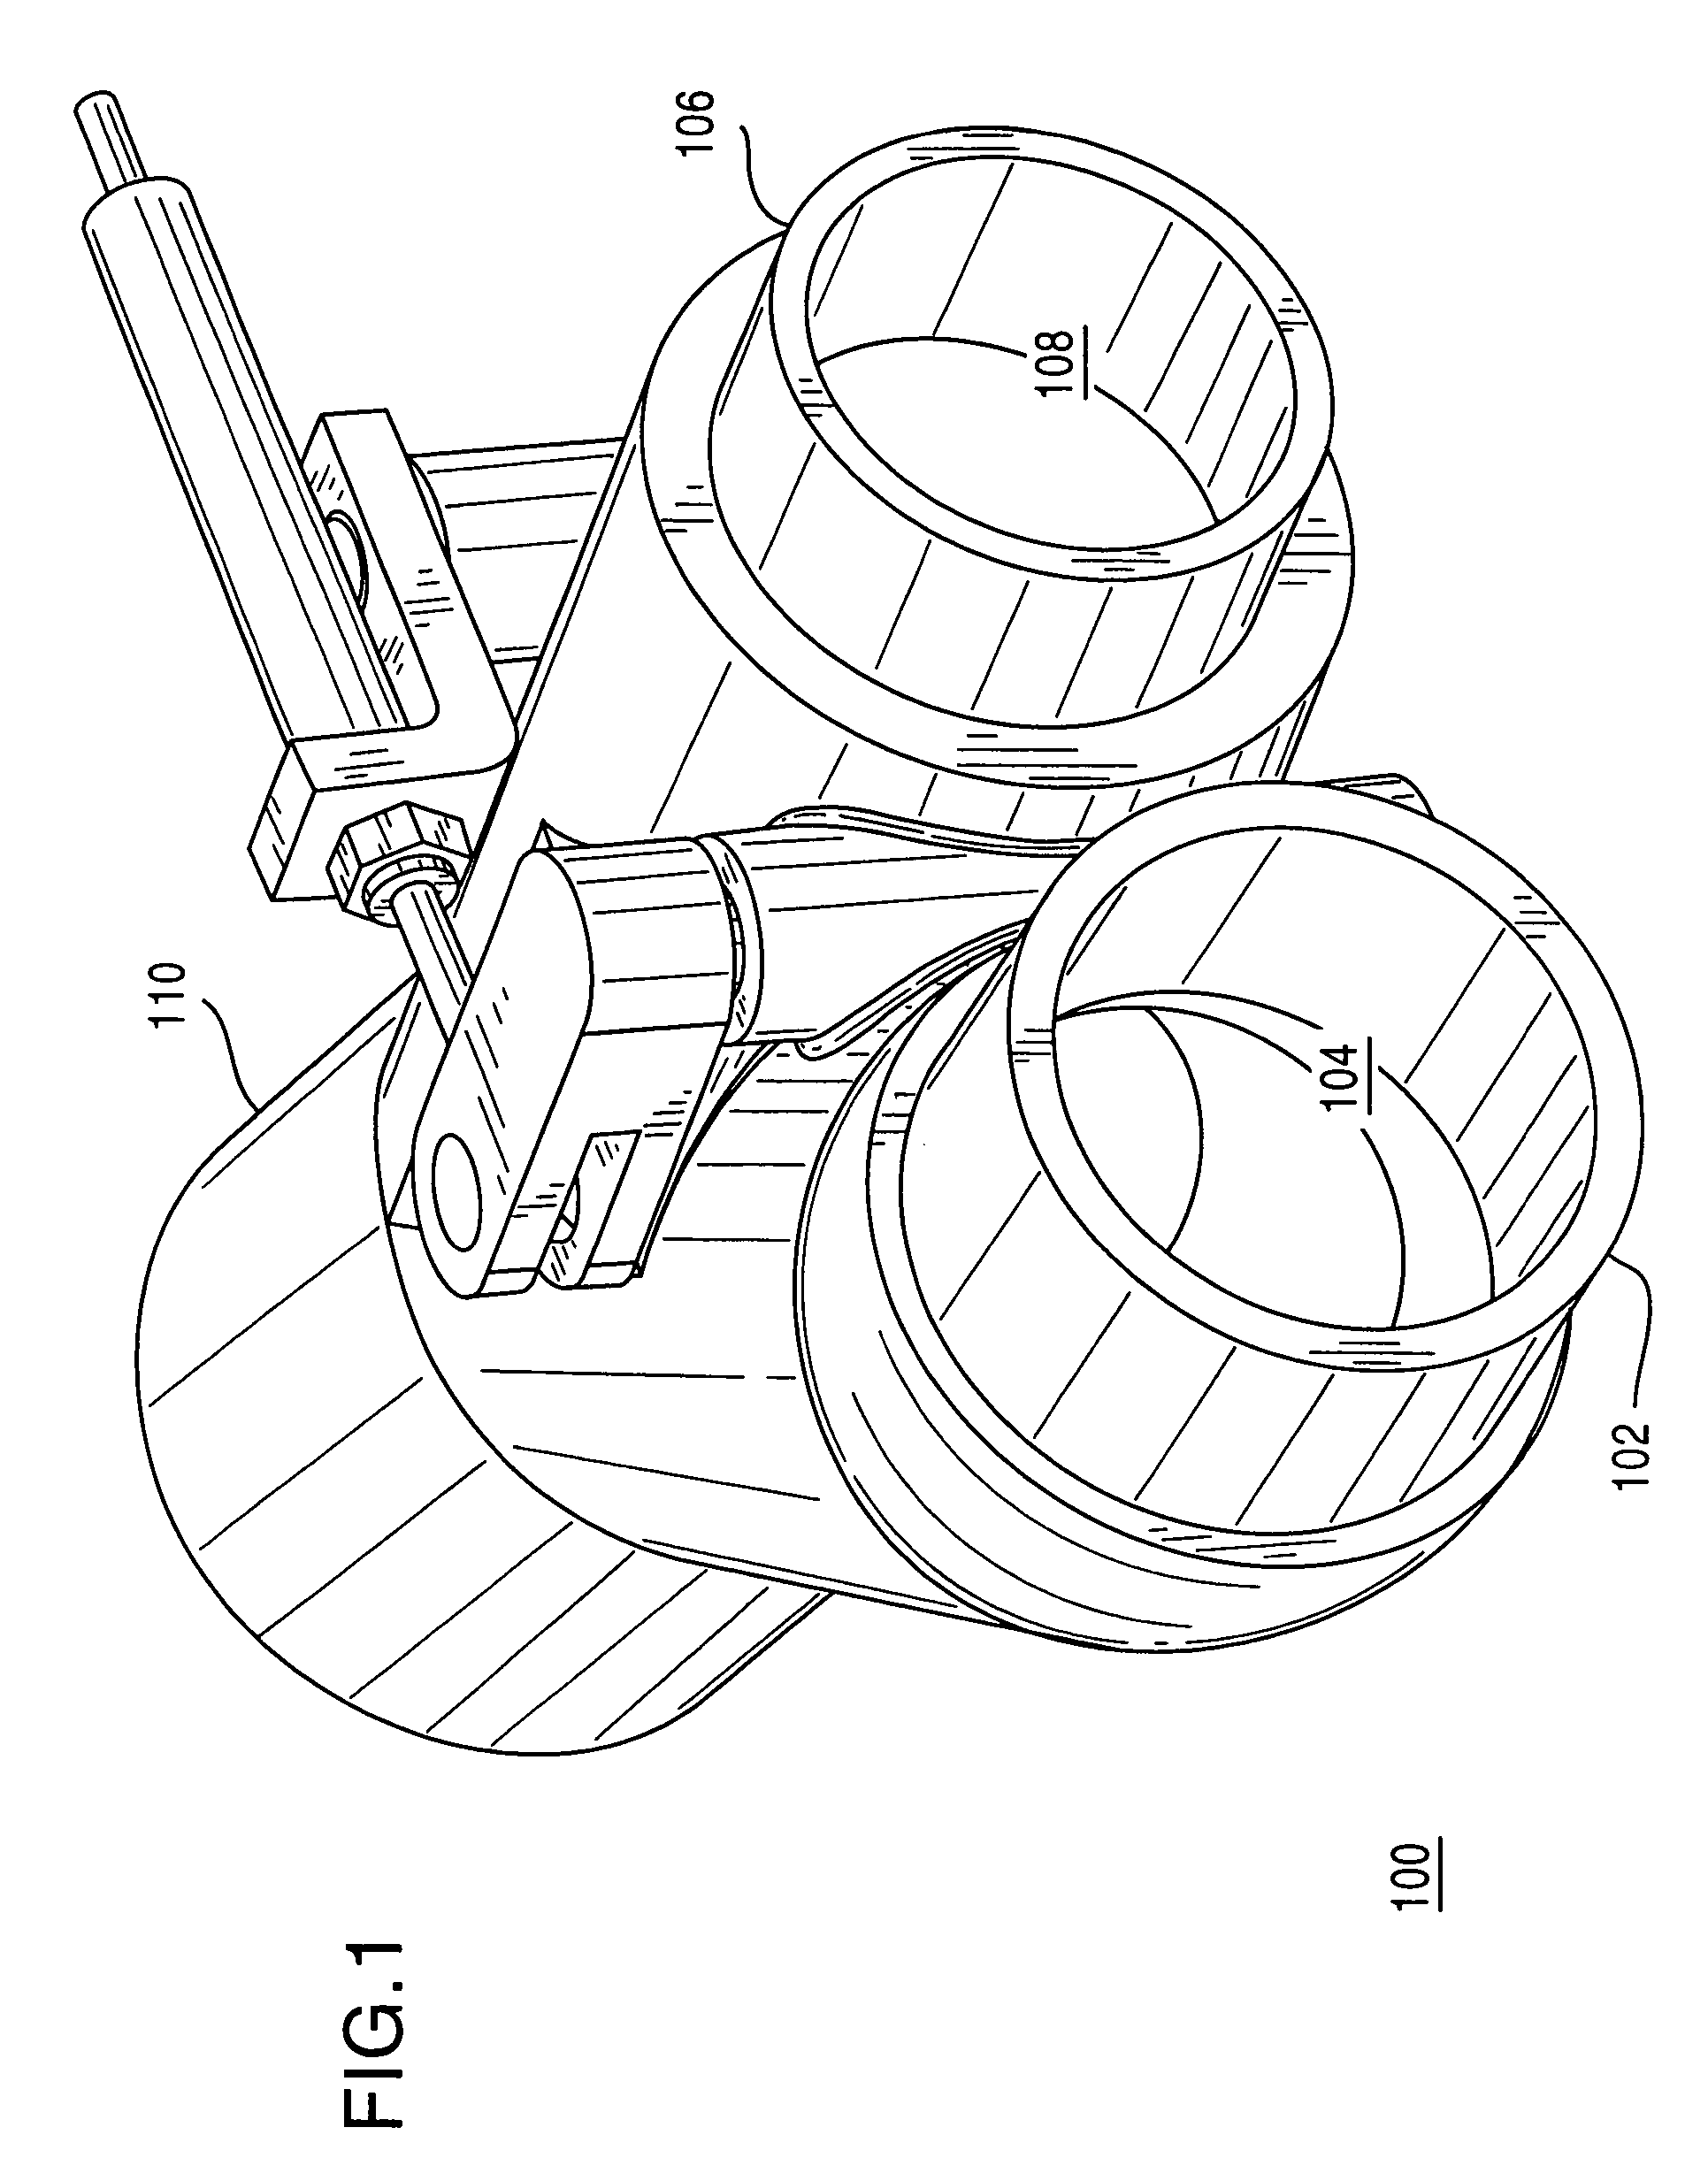 Changeover valve and dual air supply breathing apparatus